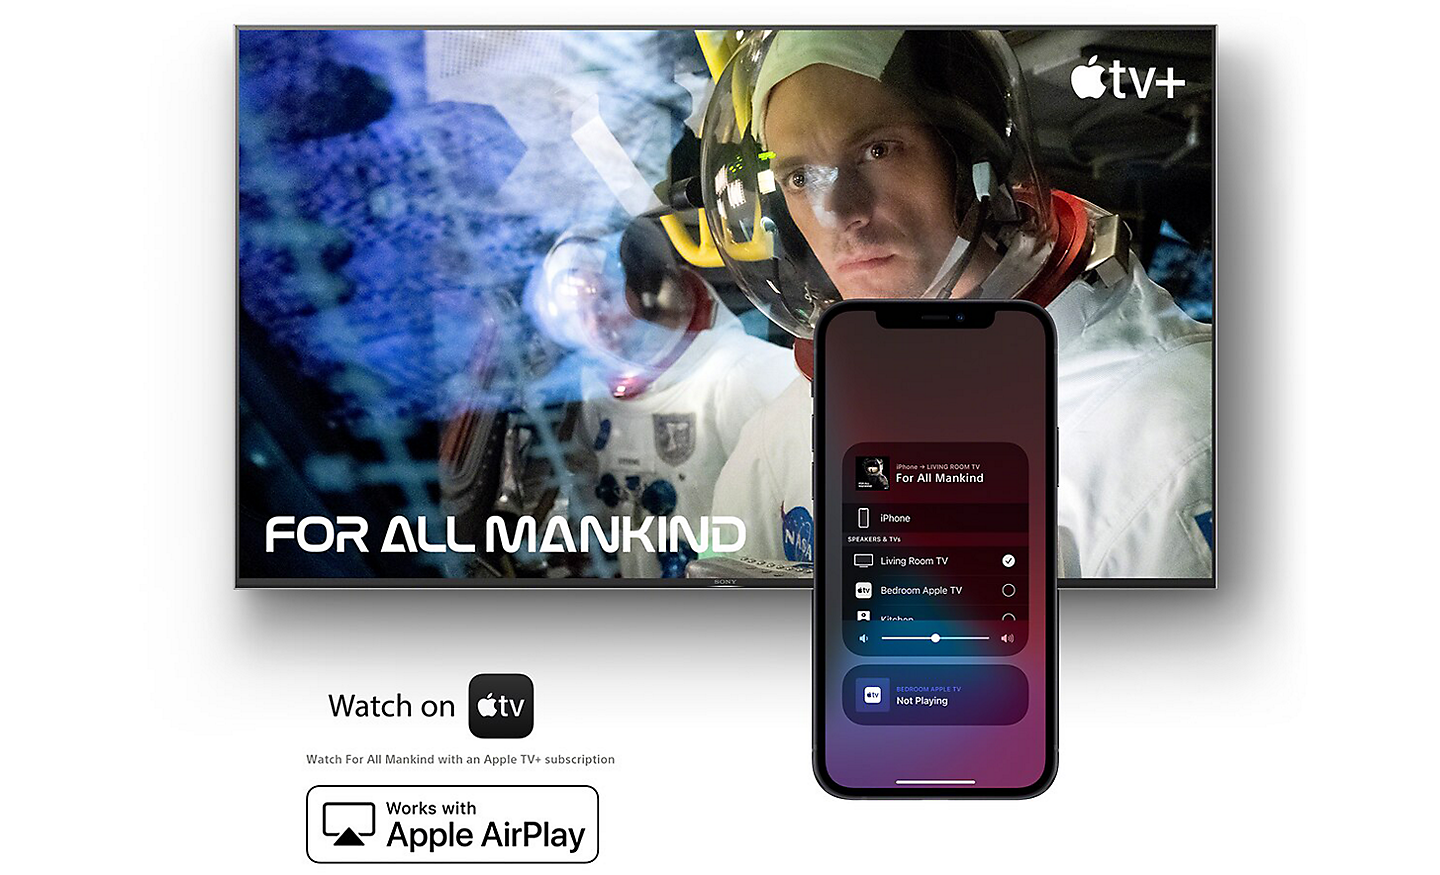 Screen showing For All Mankind on Apple TV with a smartphone in front, and logos for Watch on Apple TV and Works with Apple AirPlay below